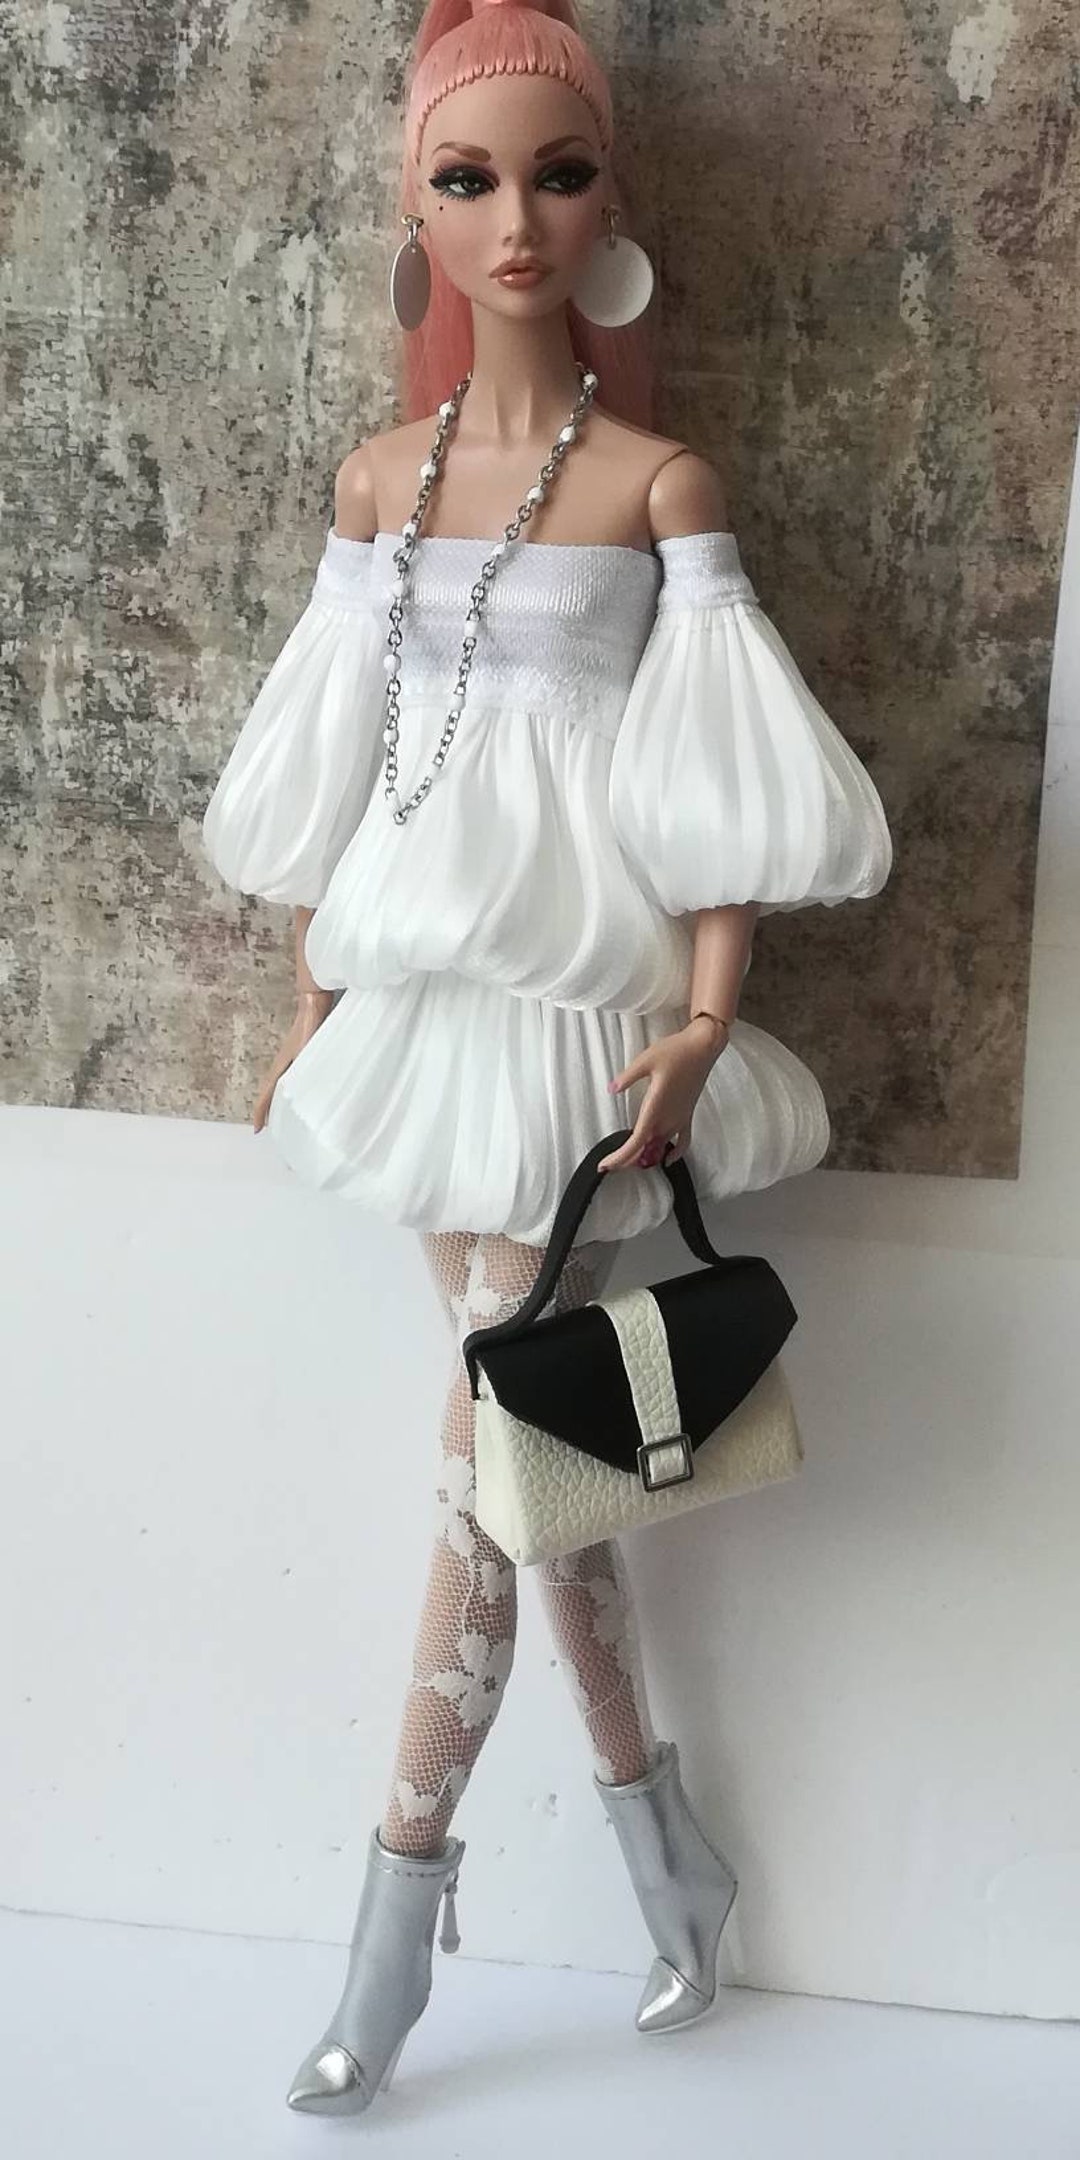 12 Inch Doll Fashion & Accessories Handmade to Fit All 11/12 - Etsy